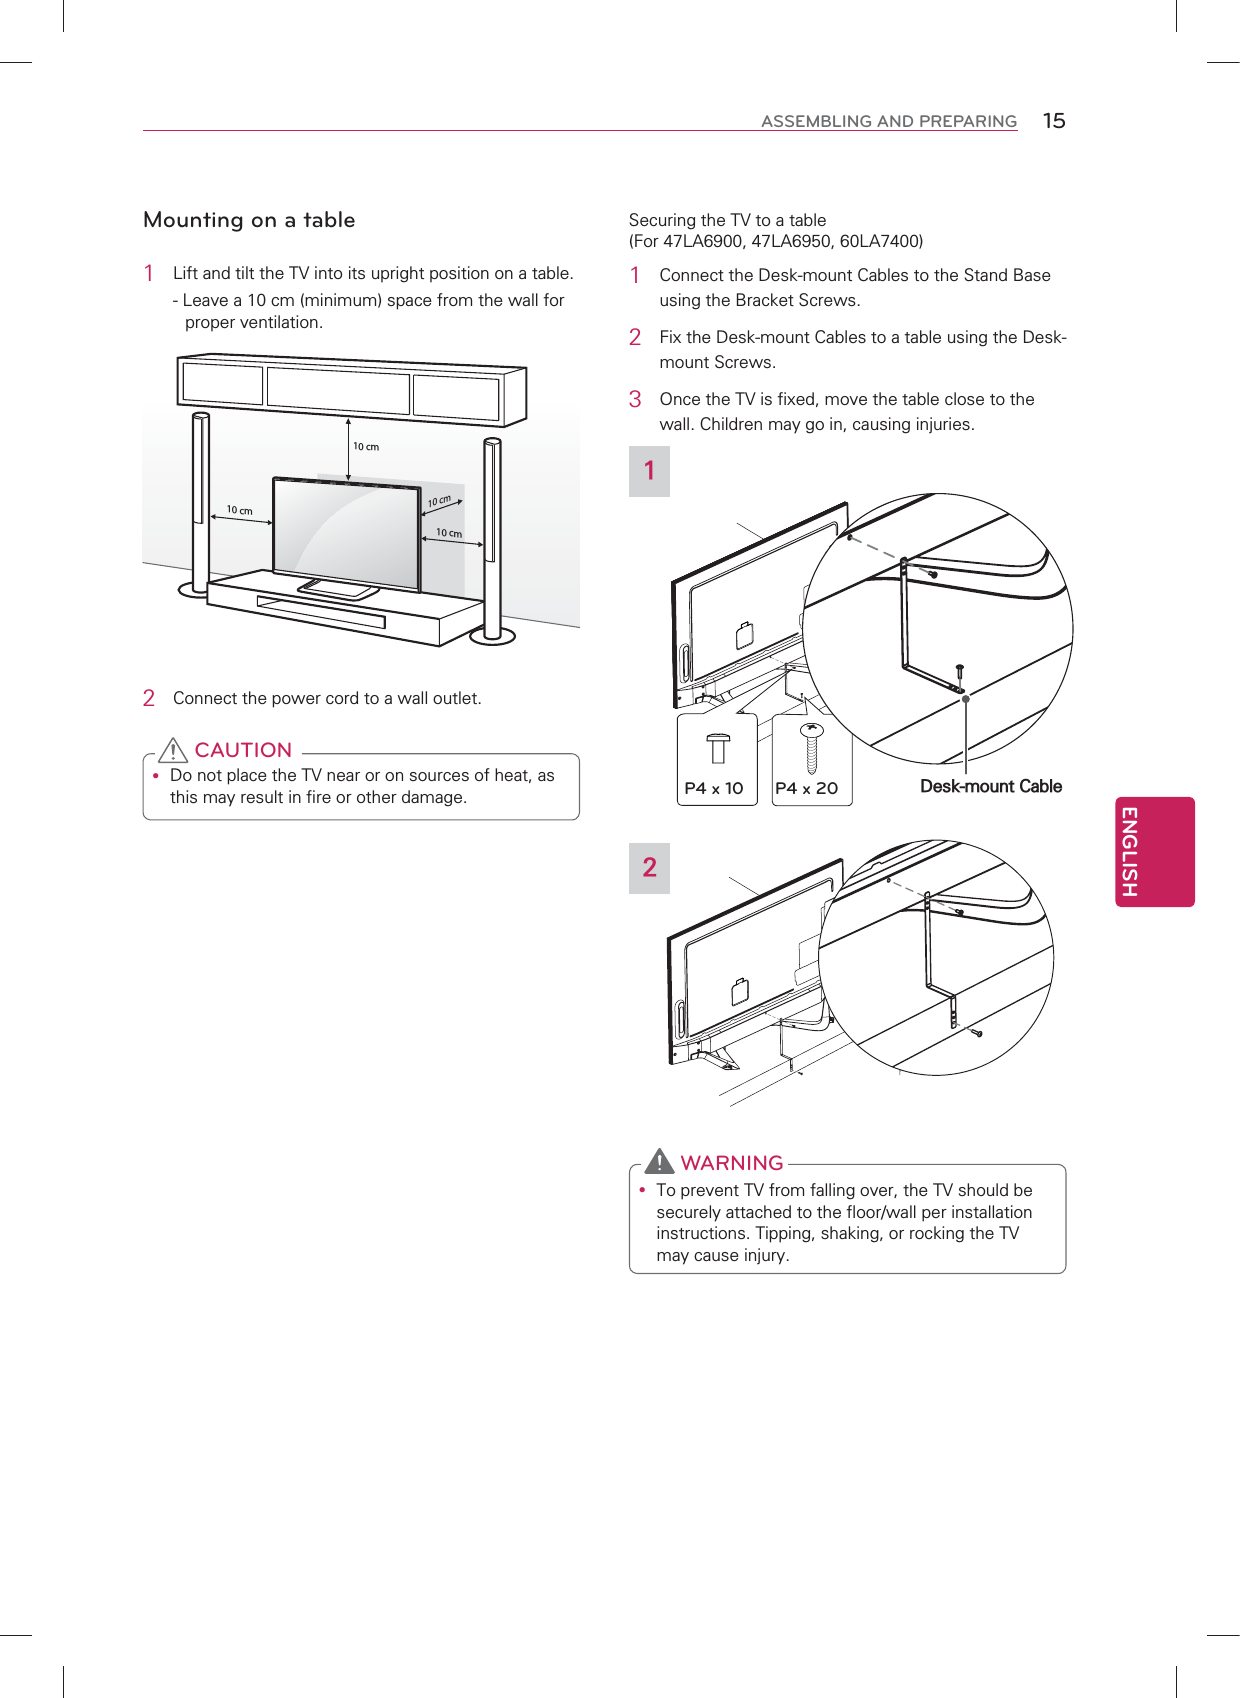 ENGLISH15ASSEMBLING AND PREPARINGMounting on a table1  Lift and tilt the TV into its upright position on a table.- Leave a 10 cm (minimum) space from the wall for proper ventilation.10 cm10 cm10 cm10 cm2  Connect the power cord to a wall outlet.y Do not place the TV near or on sources of heat, as this may result in fire or other damage. CAUTIONSecuring the TV to a table (For 47LA6900, 47LA6950, 60LA7400)1  Connect the Desk-mount Cables to the Stand Base using the Bracket Screws.2  Fix the Desk-mount Cables to a table using the Desk-mount Screws.3 Once the TV is fixed, move the table close to the wall. Children may go in, causing injuries.1Desk-mount CableP4 x 10 P4 x 202y To prevent TV from falling over, the TV should be securely attached to the floor/wall per installation instructions. Tipping, shaking, or rocking the TV may cause injury. WARNING